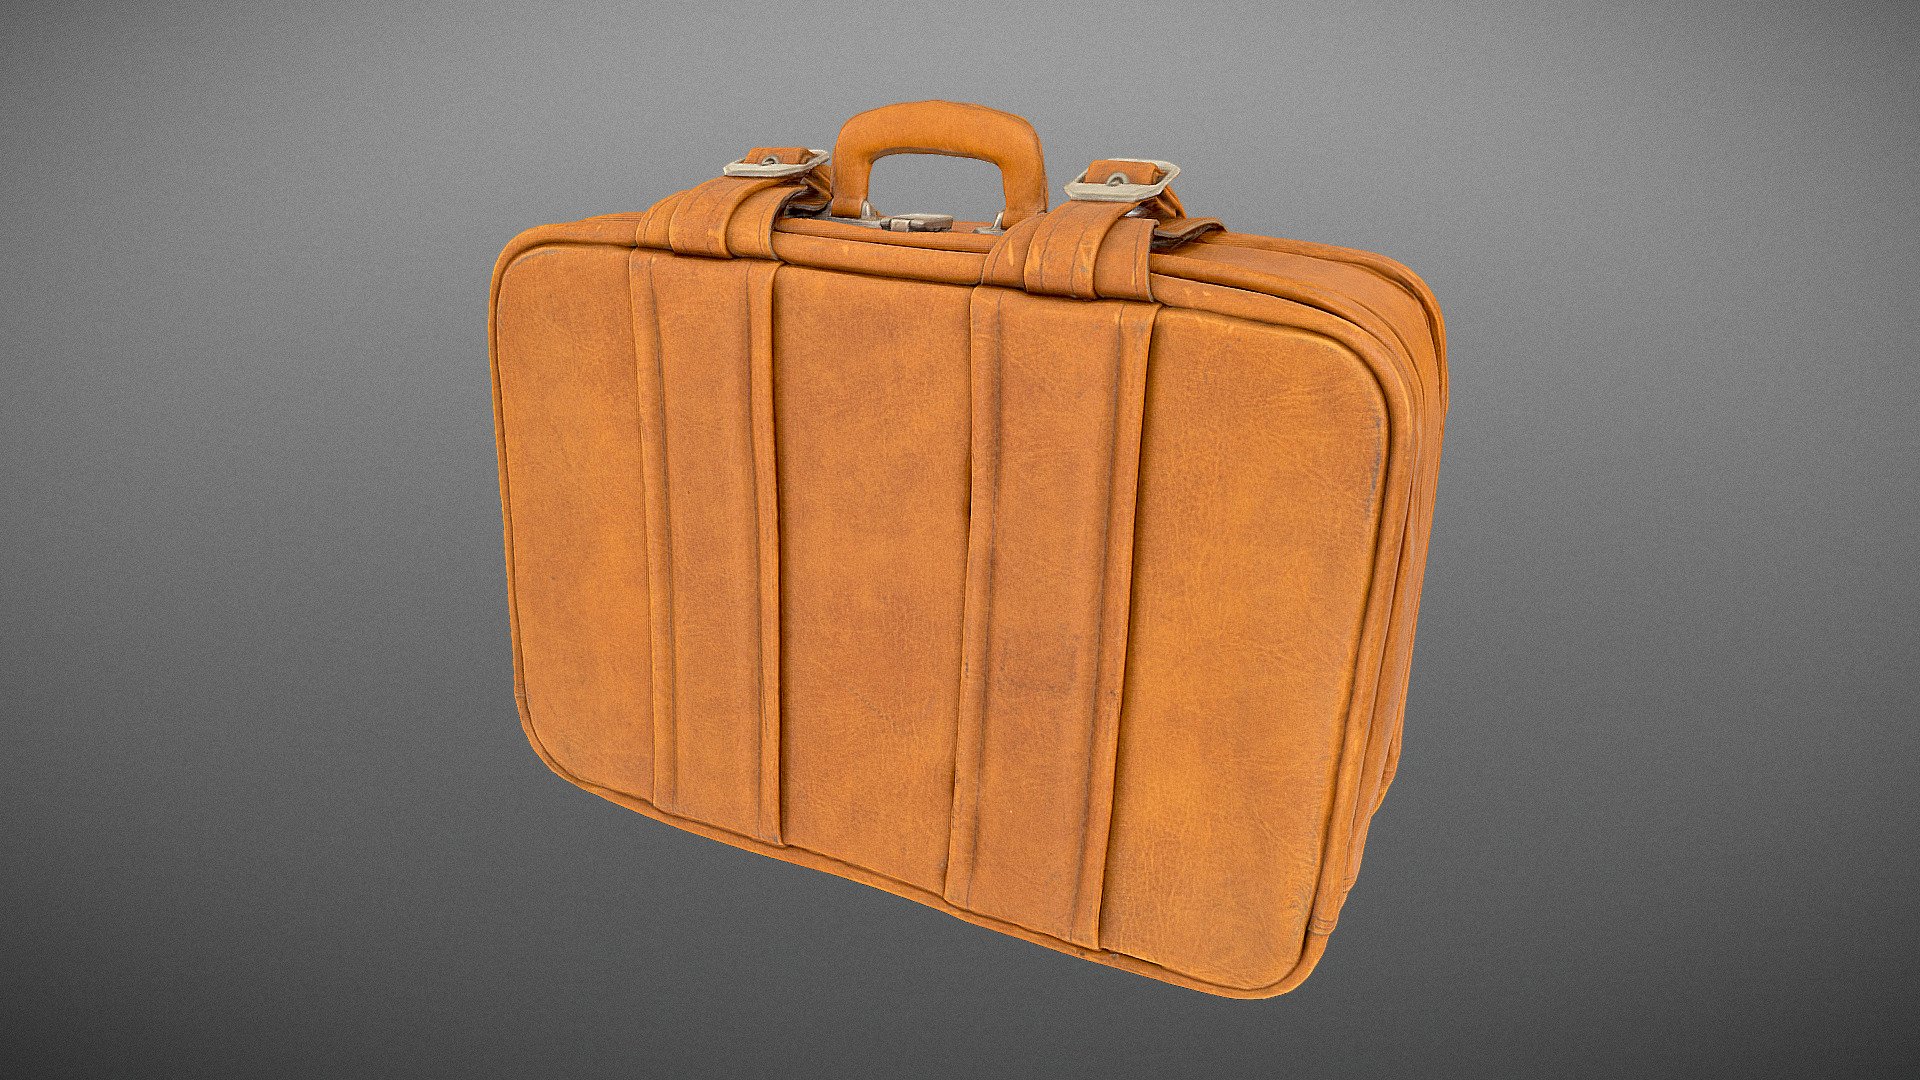 Old retro vintage 50s suitcase old case travel luggage, brown leather skin baggage bag

Photogrammetry scan 200x24MP - Vintage leather suitcase old case luggage - Buy Royalty Free 3D model by matousekfoto 3d model